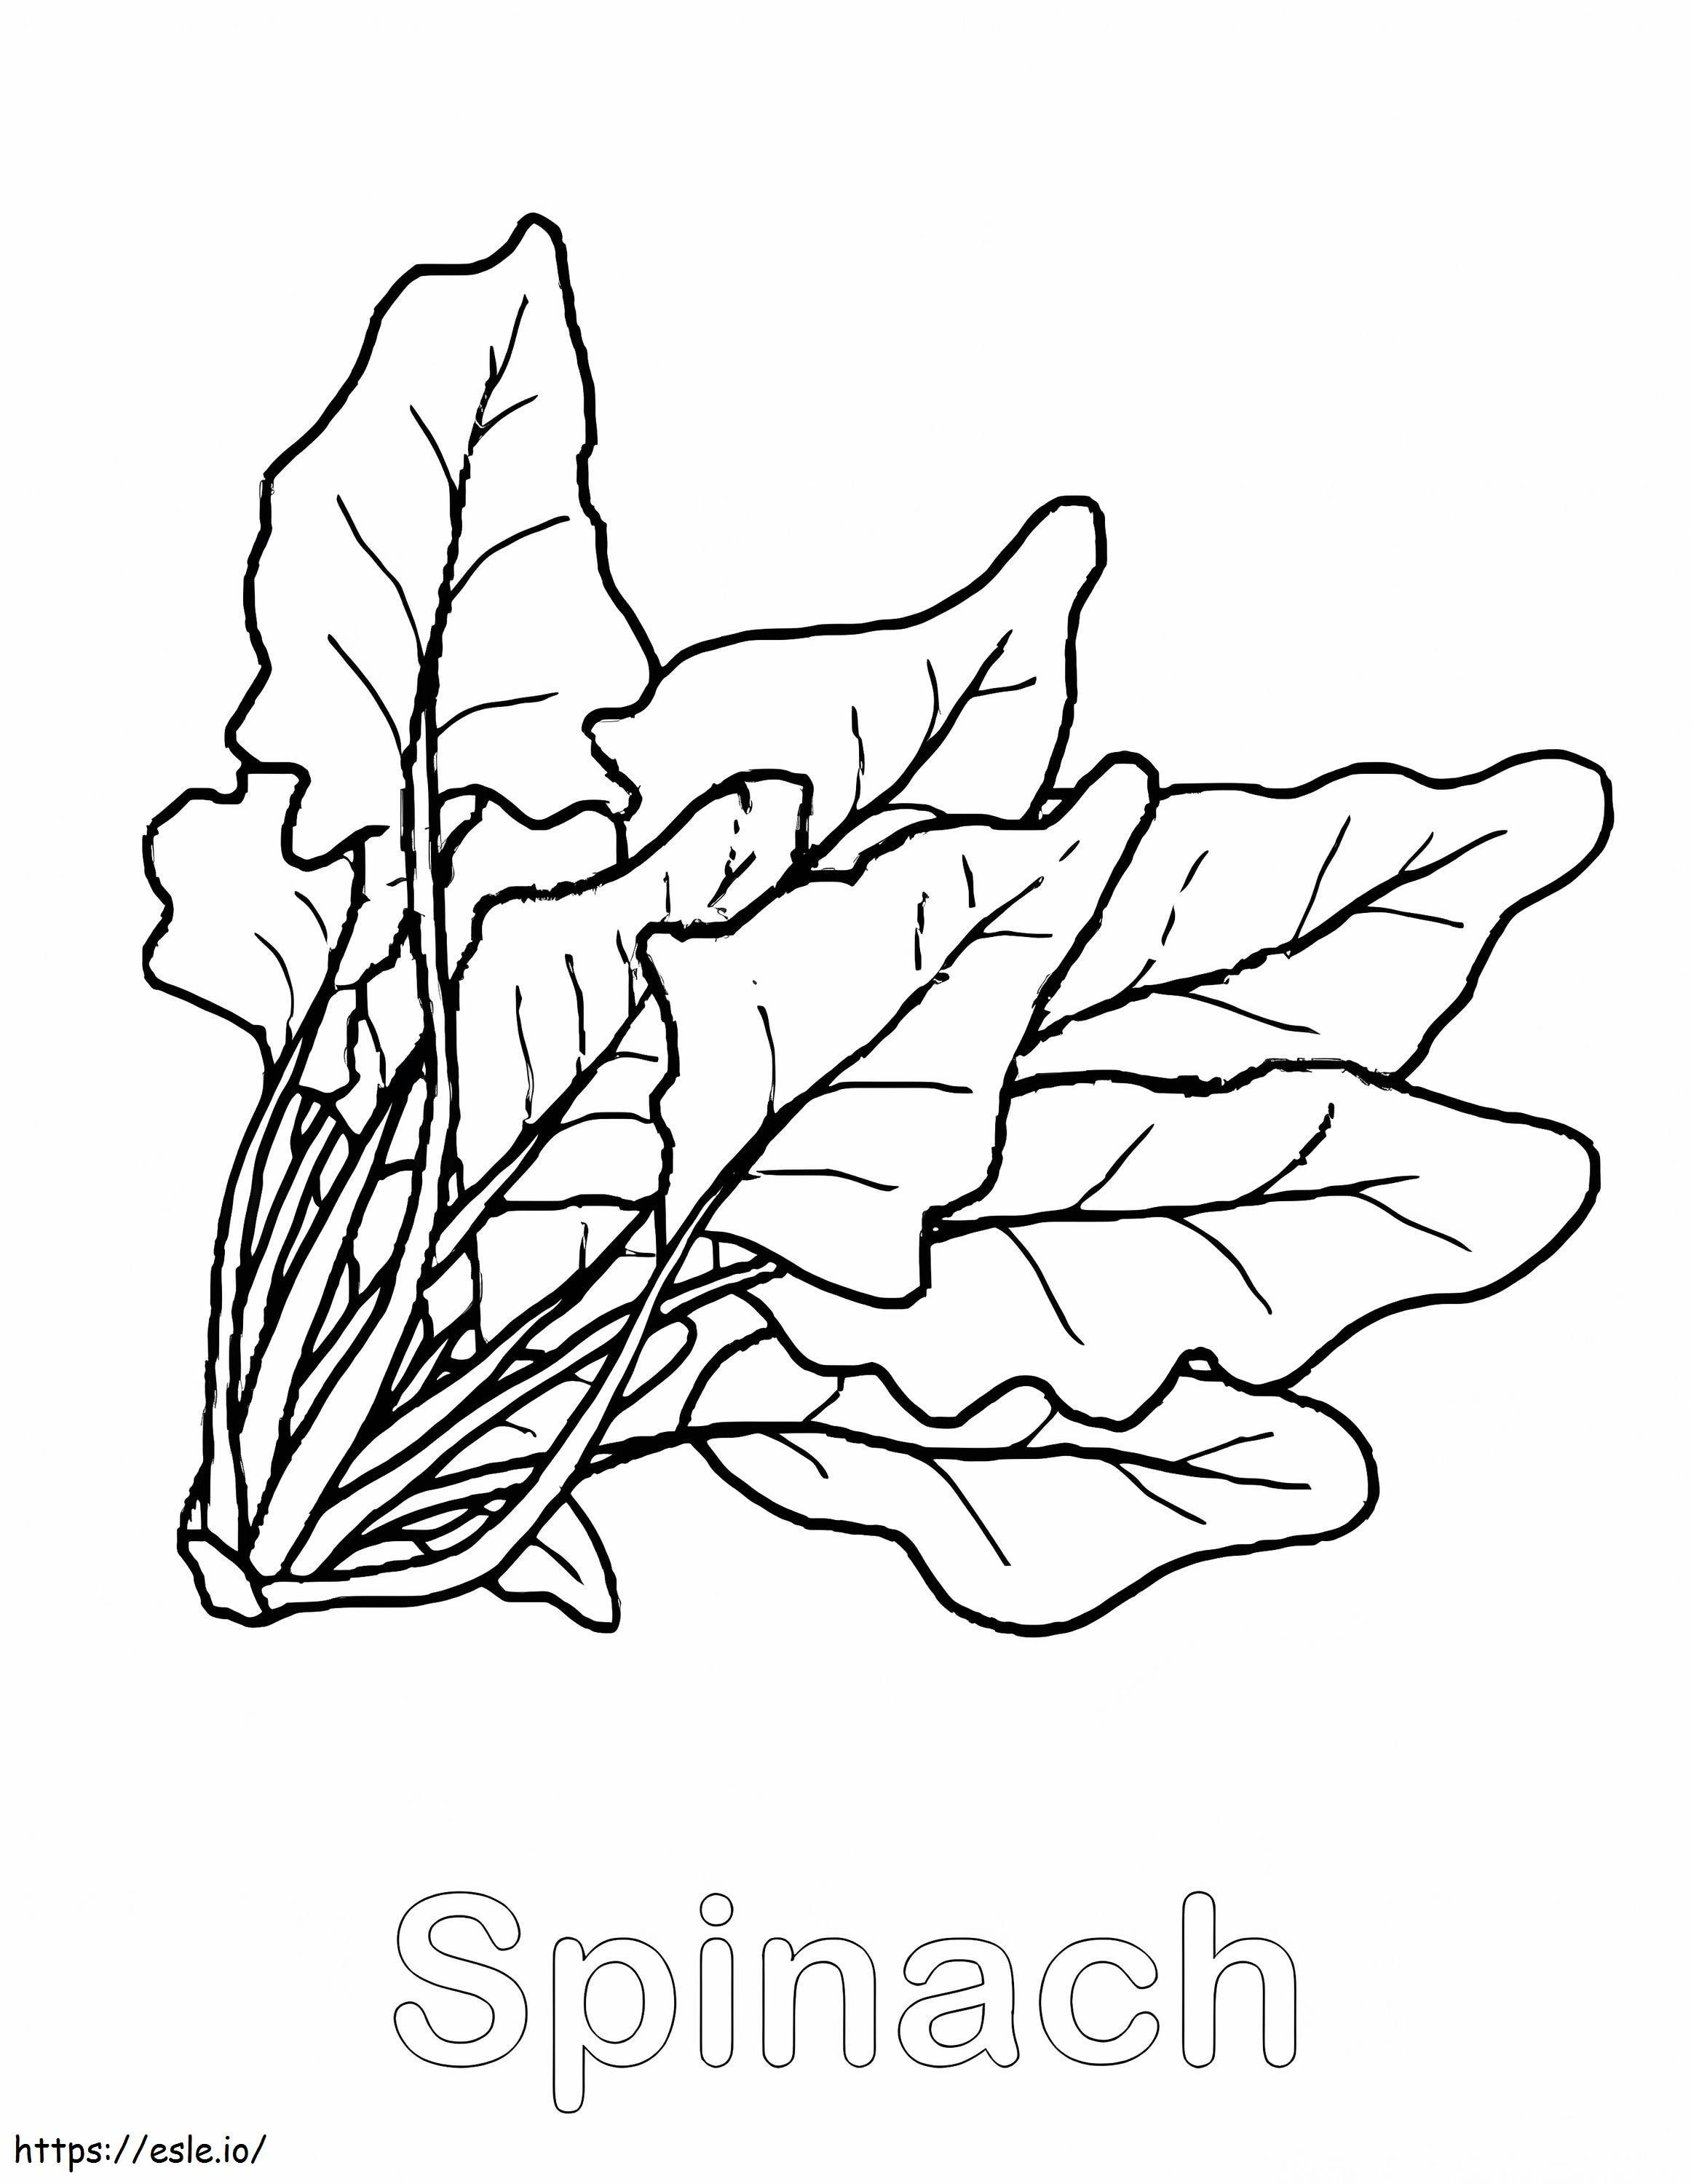 Spinach To Color coloring page